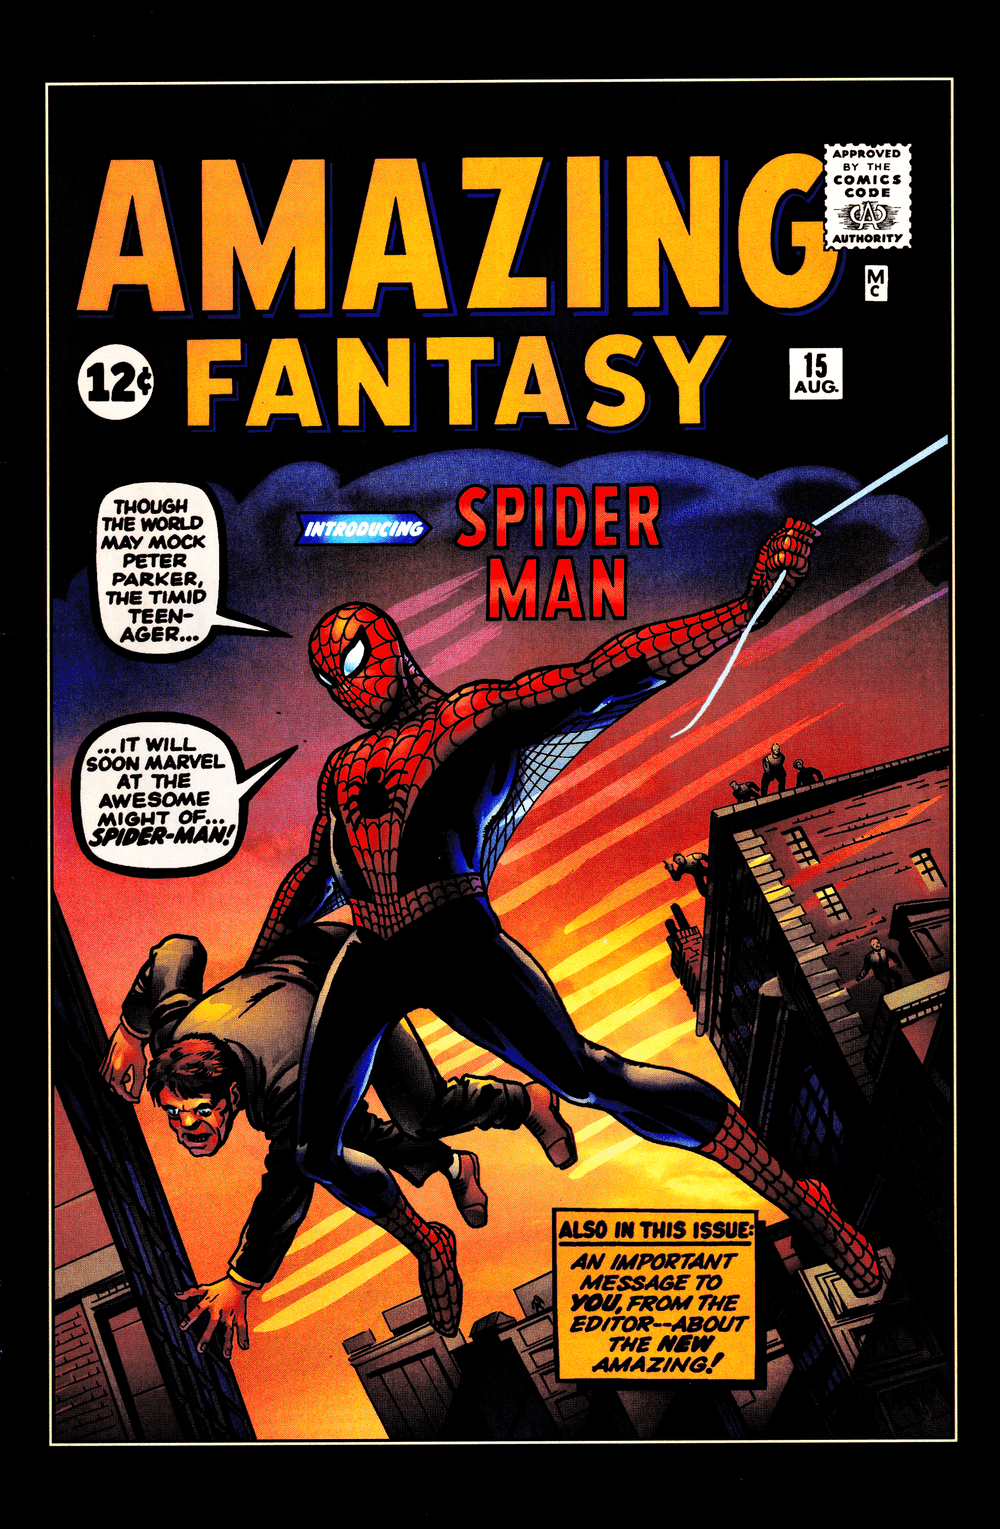 Comic Books You Should Collect: Amazing Fantasy #15